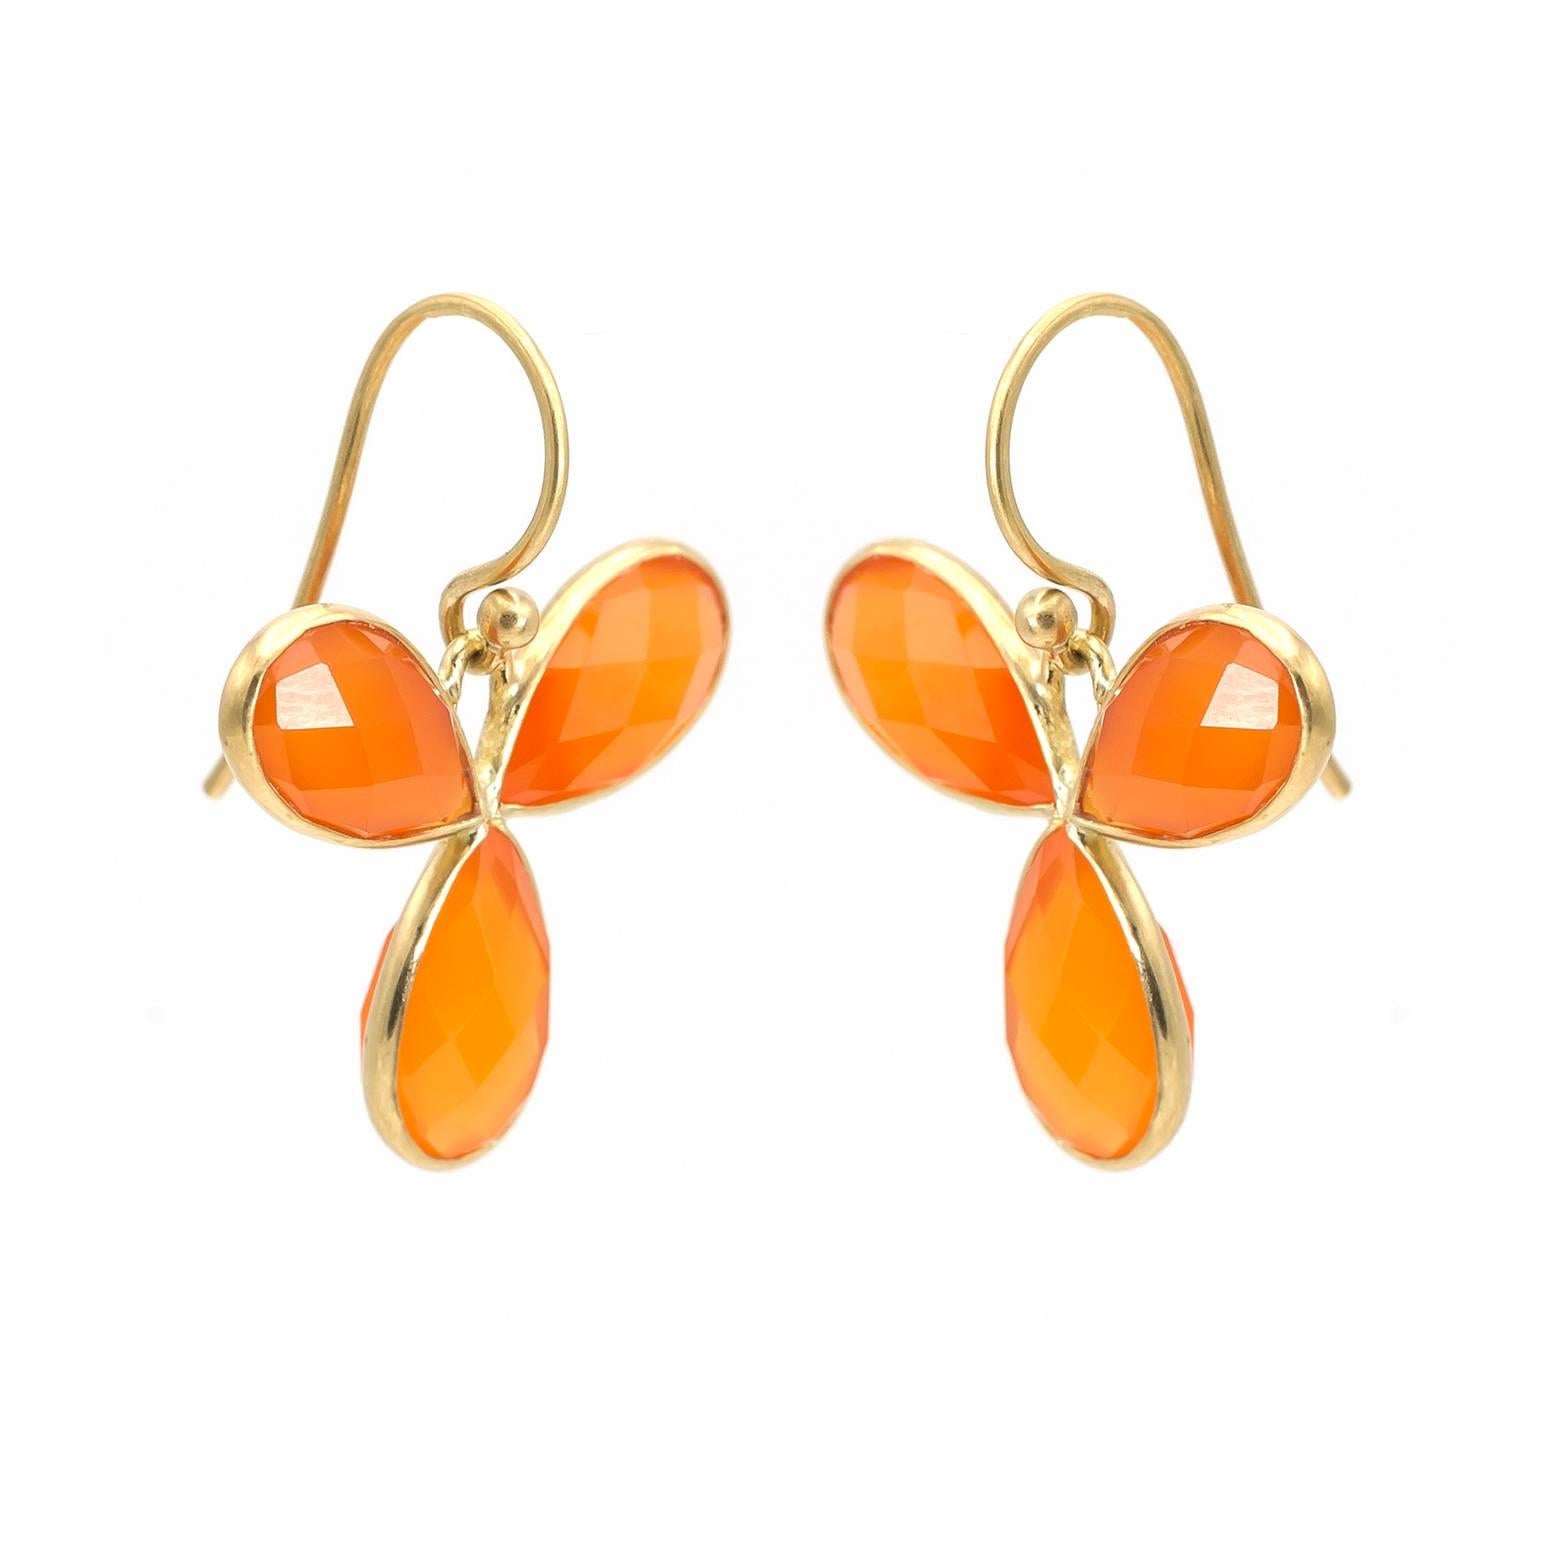 Sunburst petals of bright orange glisten and glow in gorgeous faceted carnelian. Set in 18K yellow gold these regal little beauties are sure brighten up any day and any outfit. Prepare to get extremely happy! 